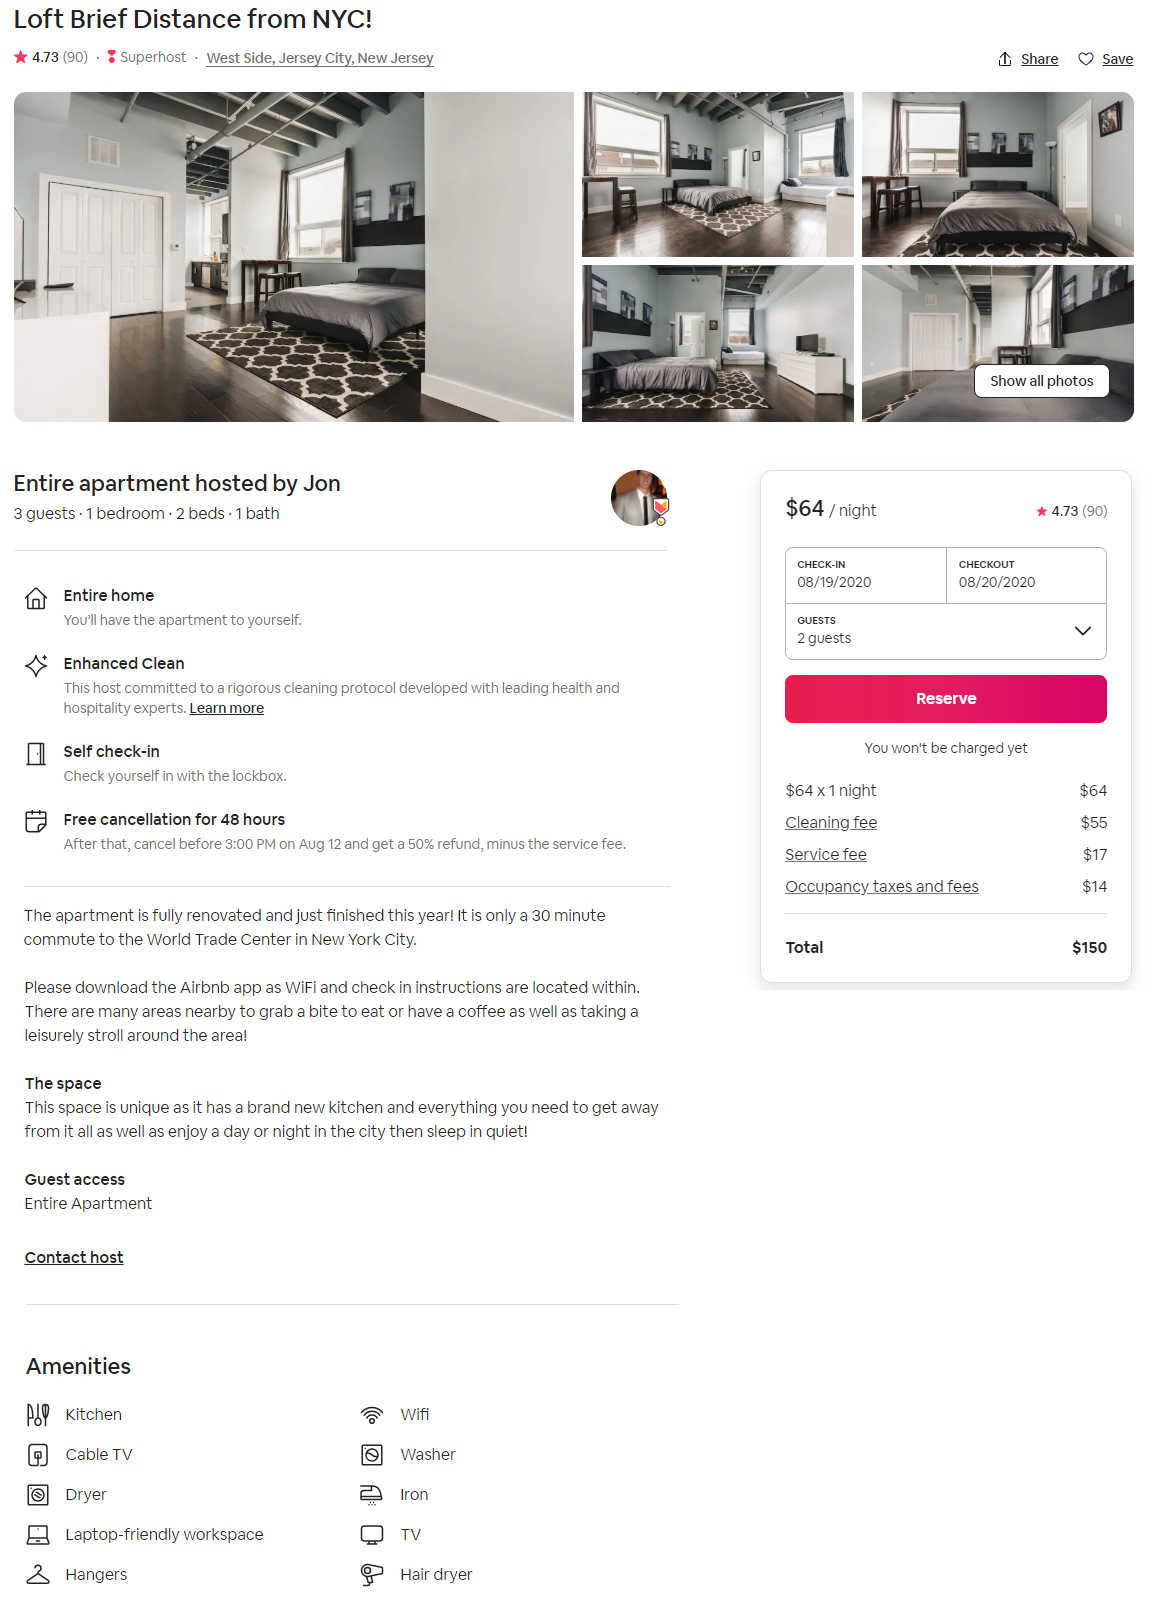 Airbnb coupon code malaysia